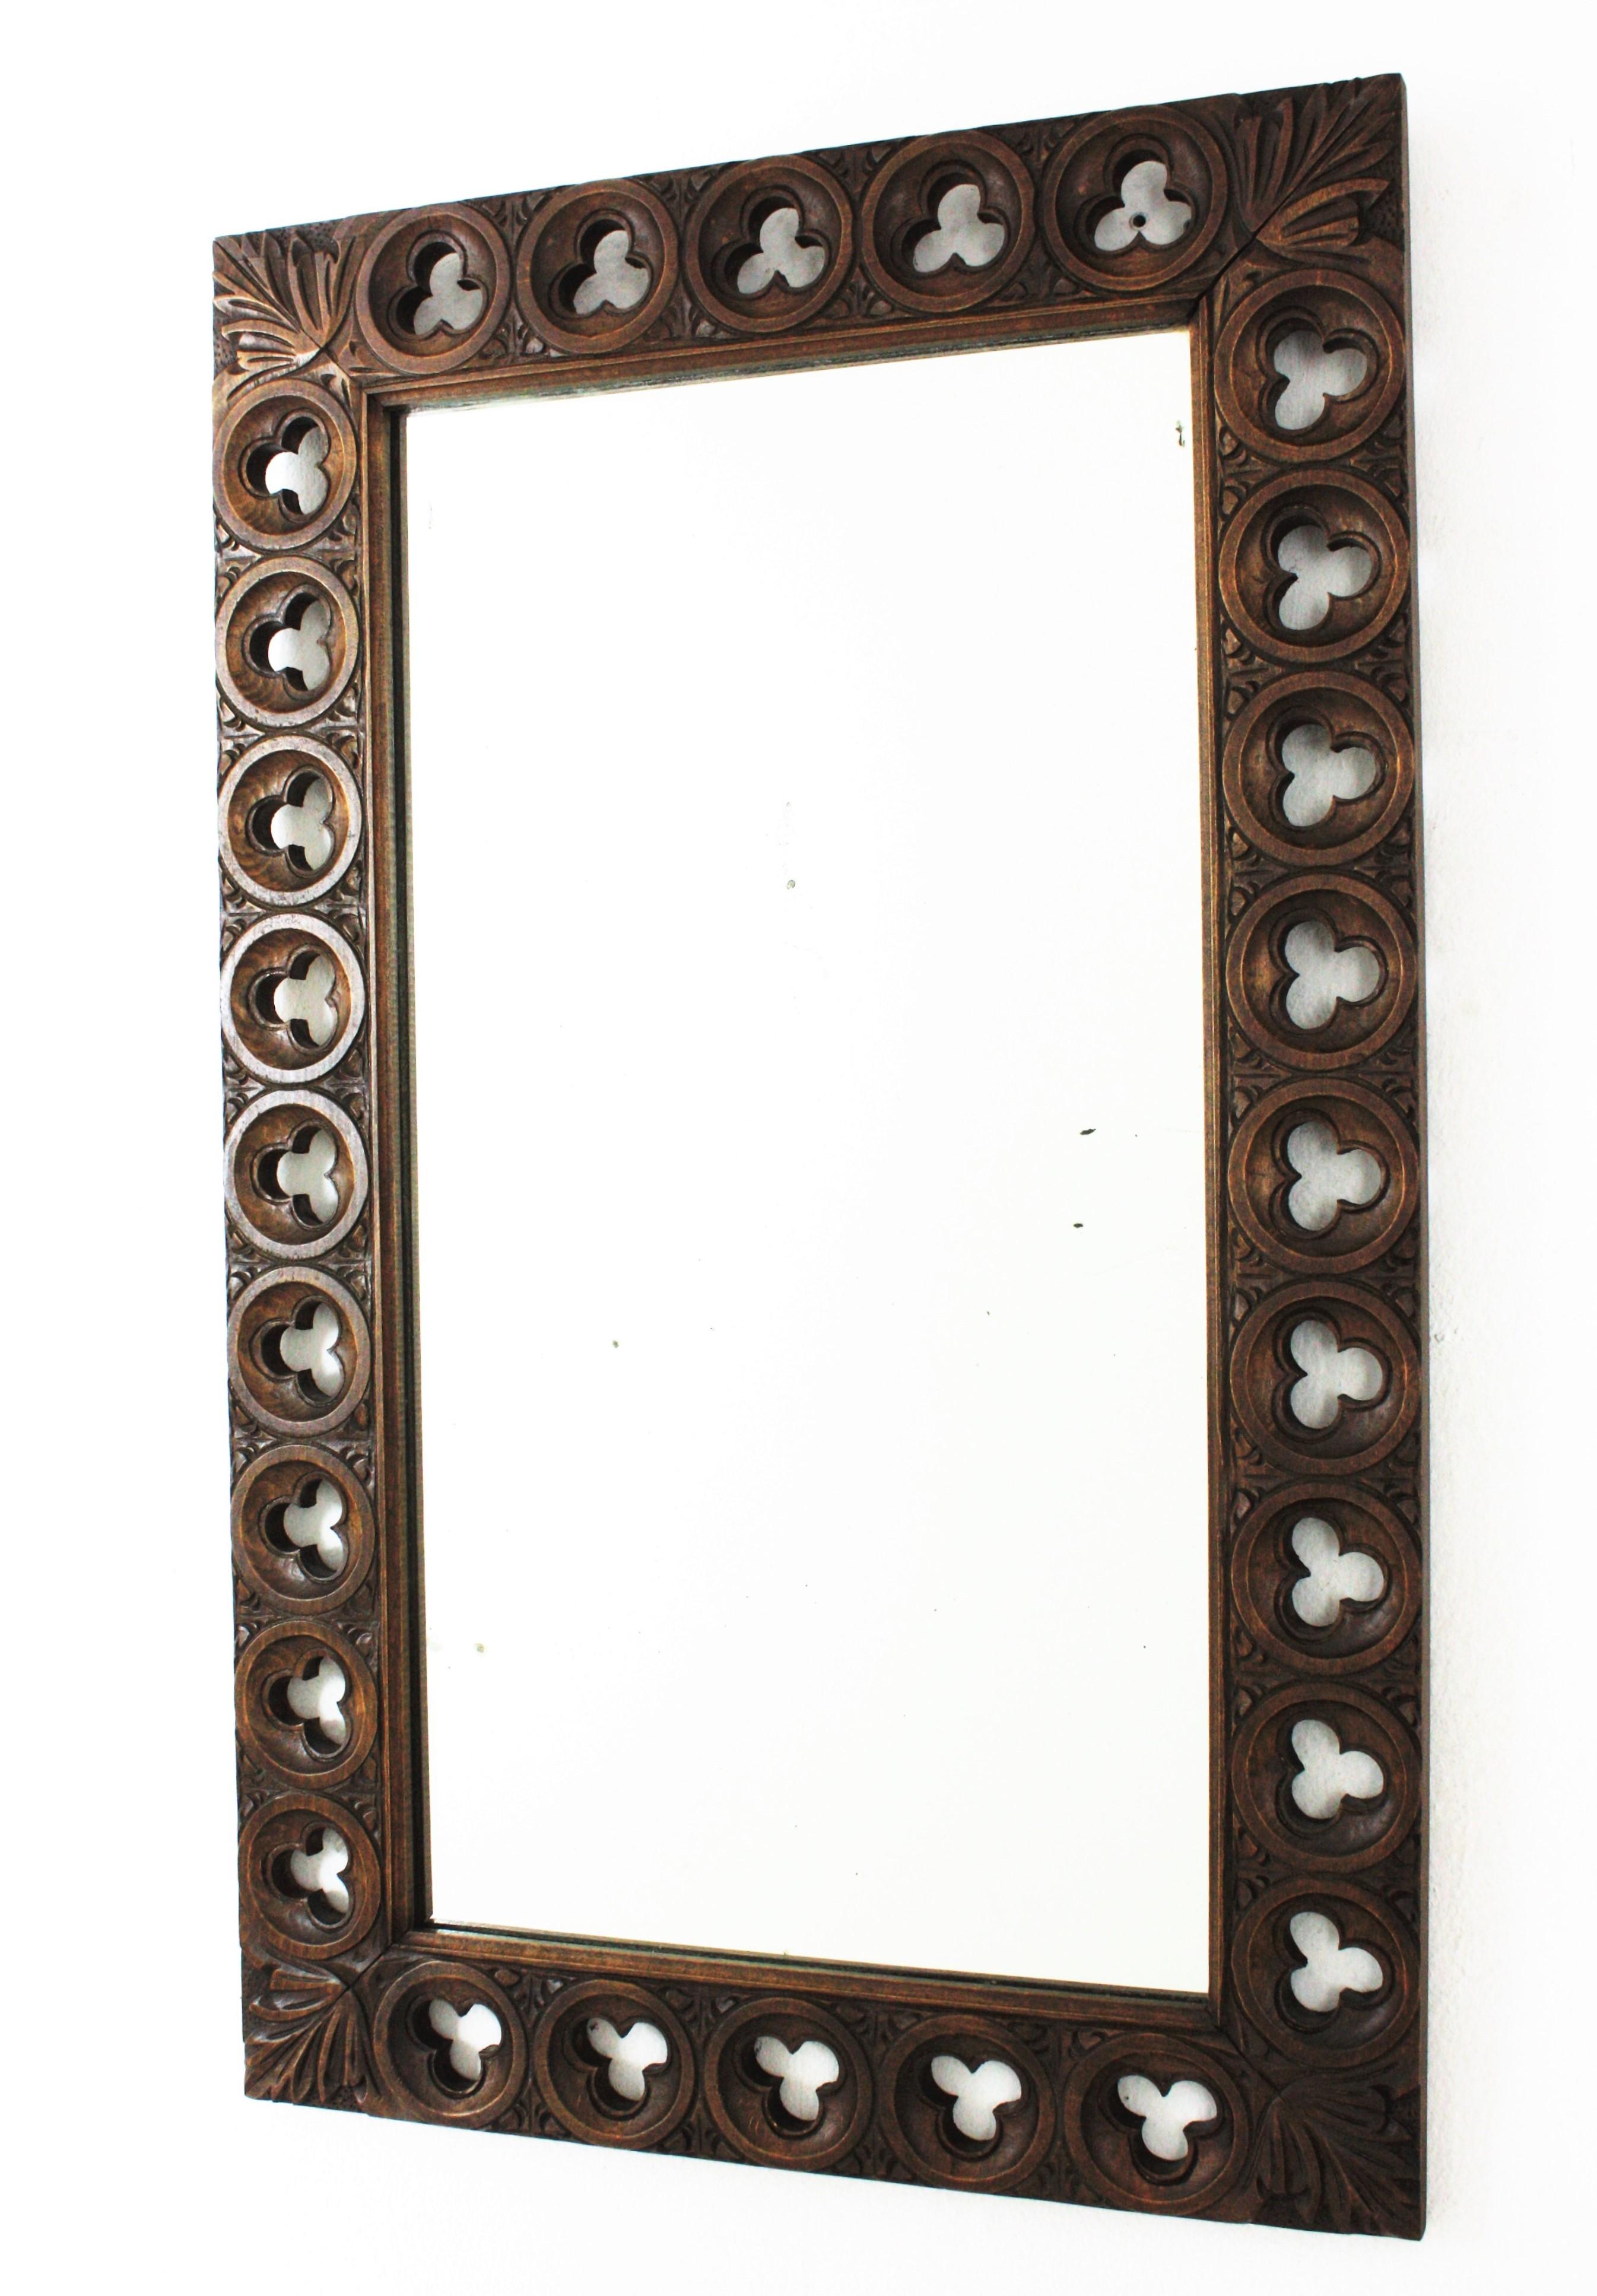 Spanish Colonial Rectangular Wall Mirror in Carved Wood 1